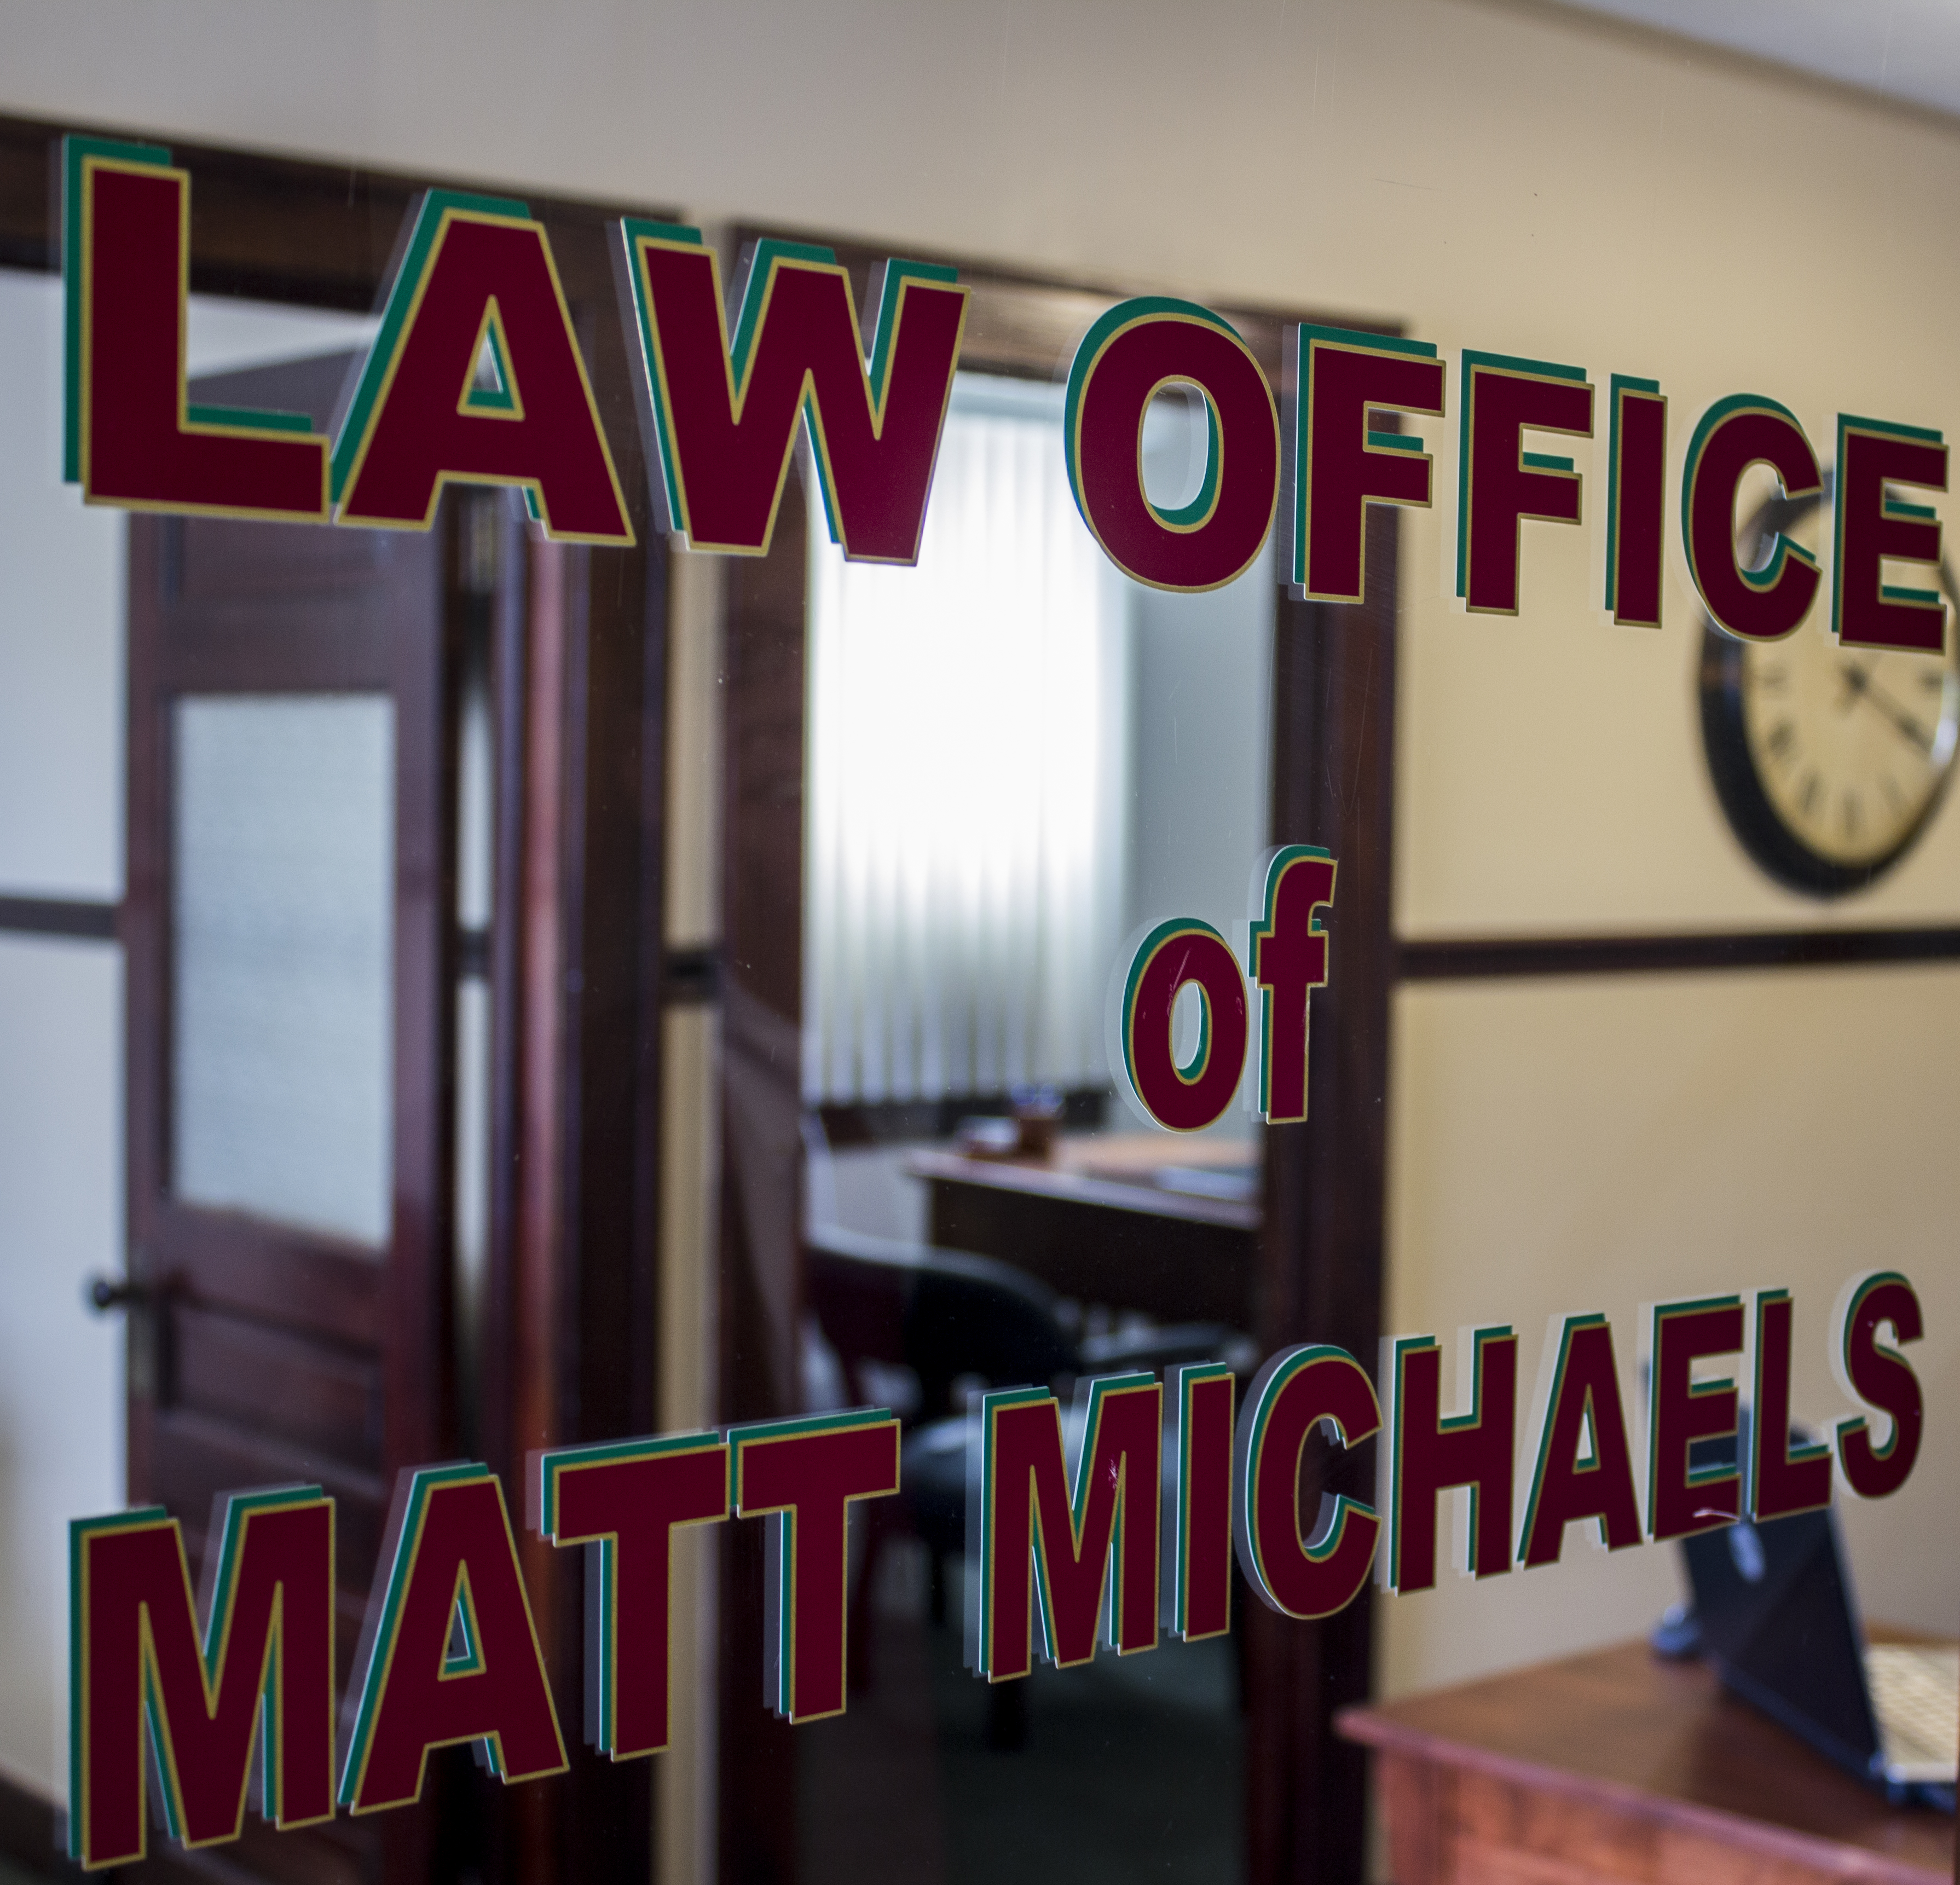 Welcome to Law Office of Matt Michaels